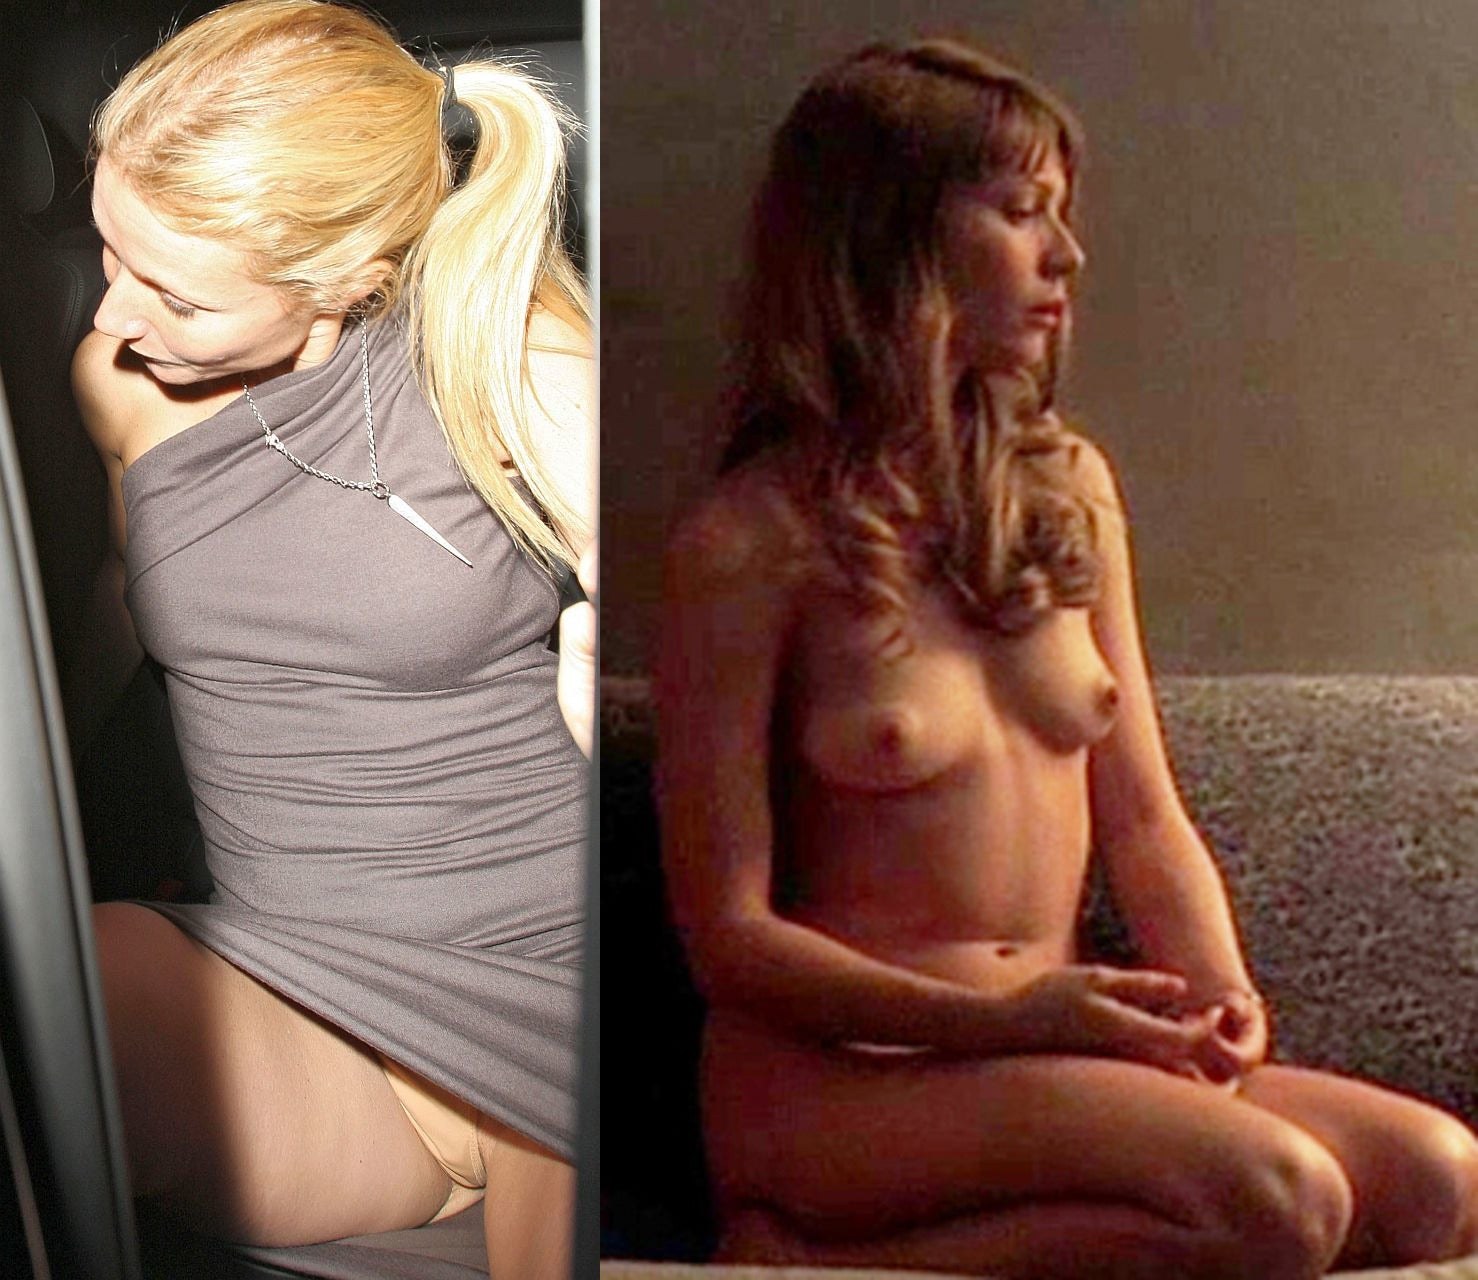 Nude pictures of gwyneth paltrow